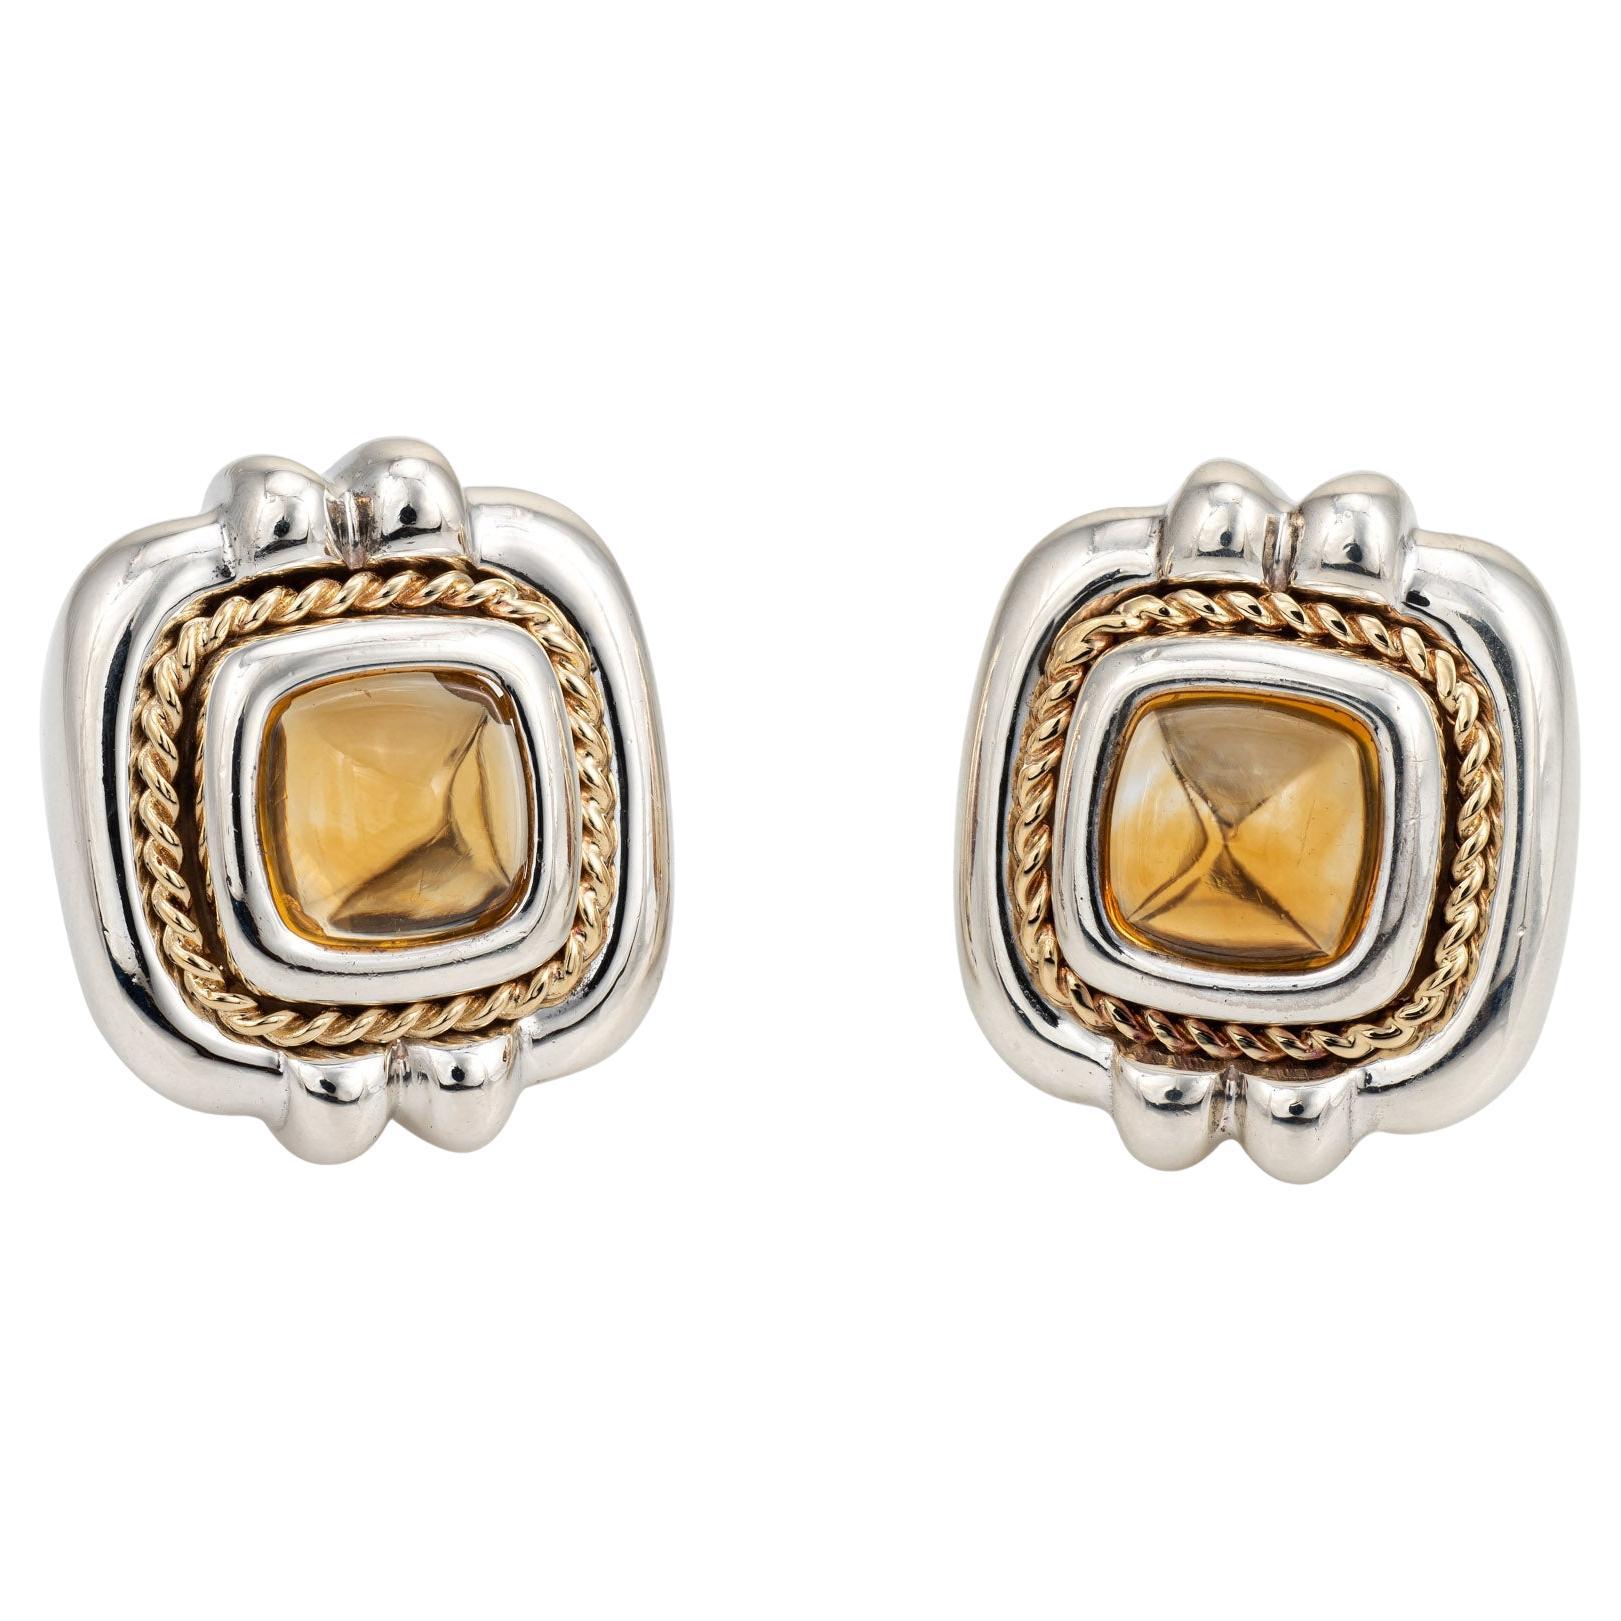 Vintage Tiffany & Co Citrine Earrings Square Sterling Silver 18k Gold Jewelry For Sale